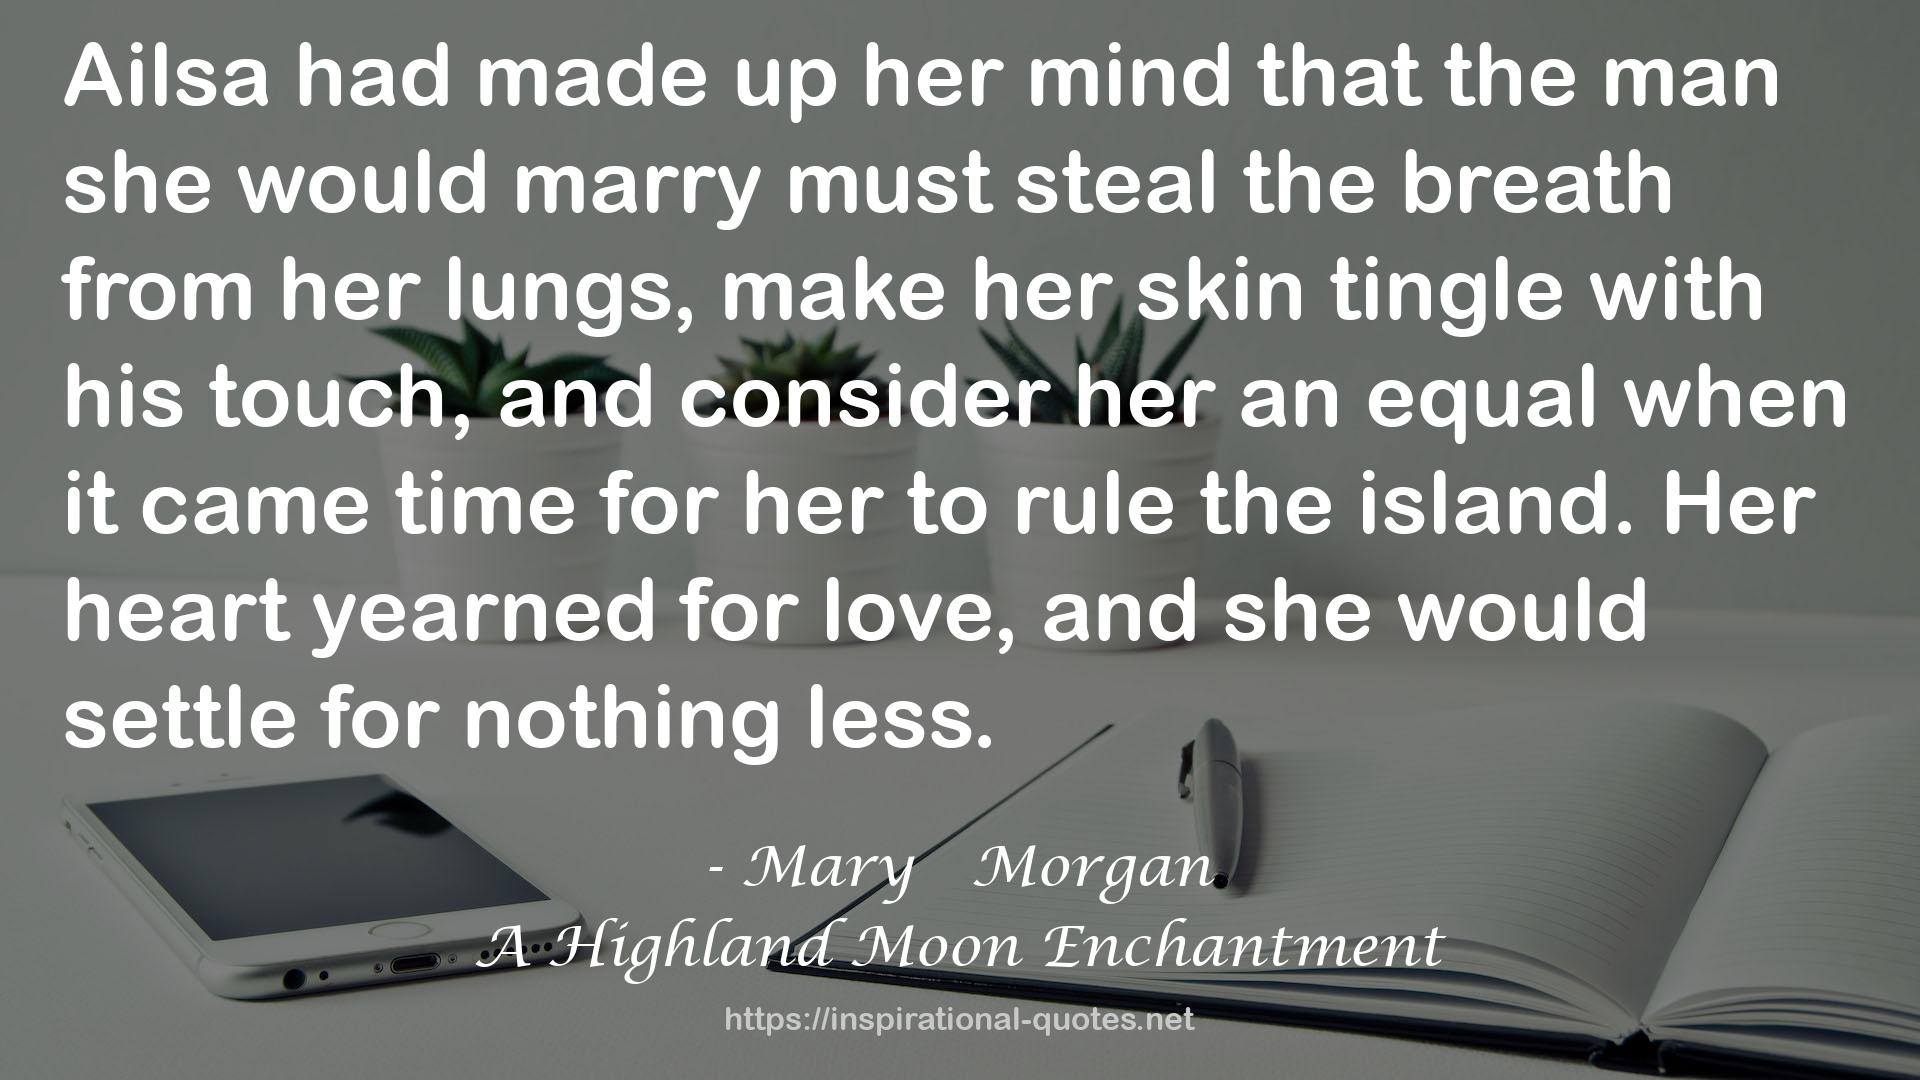 A Highland Moon Enchantment QUOTES